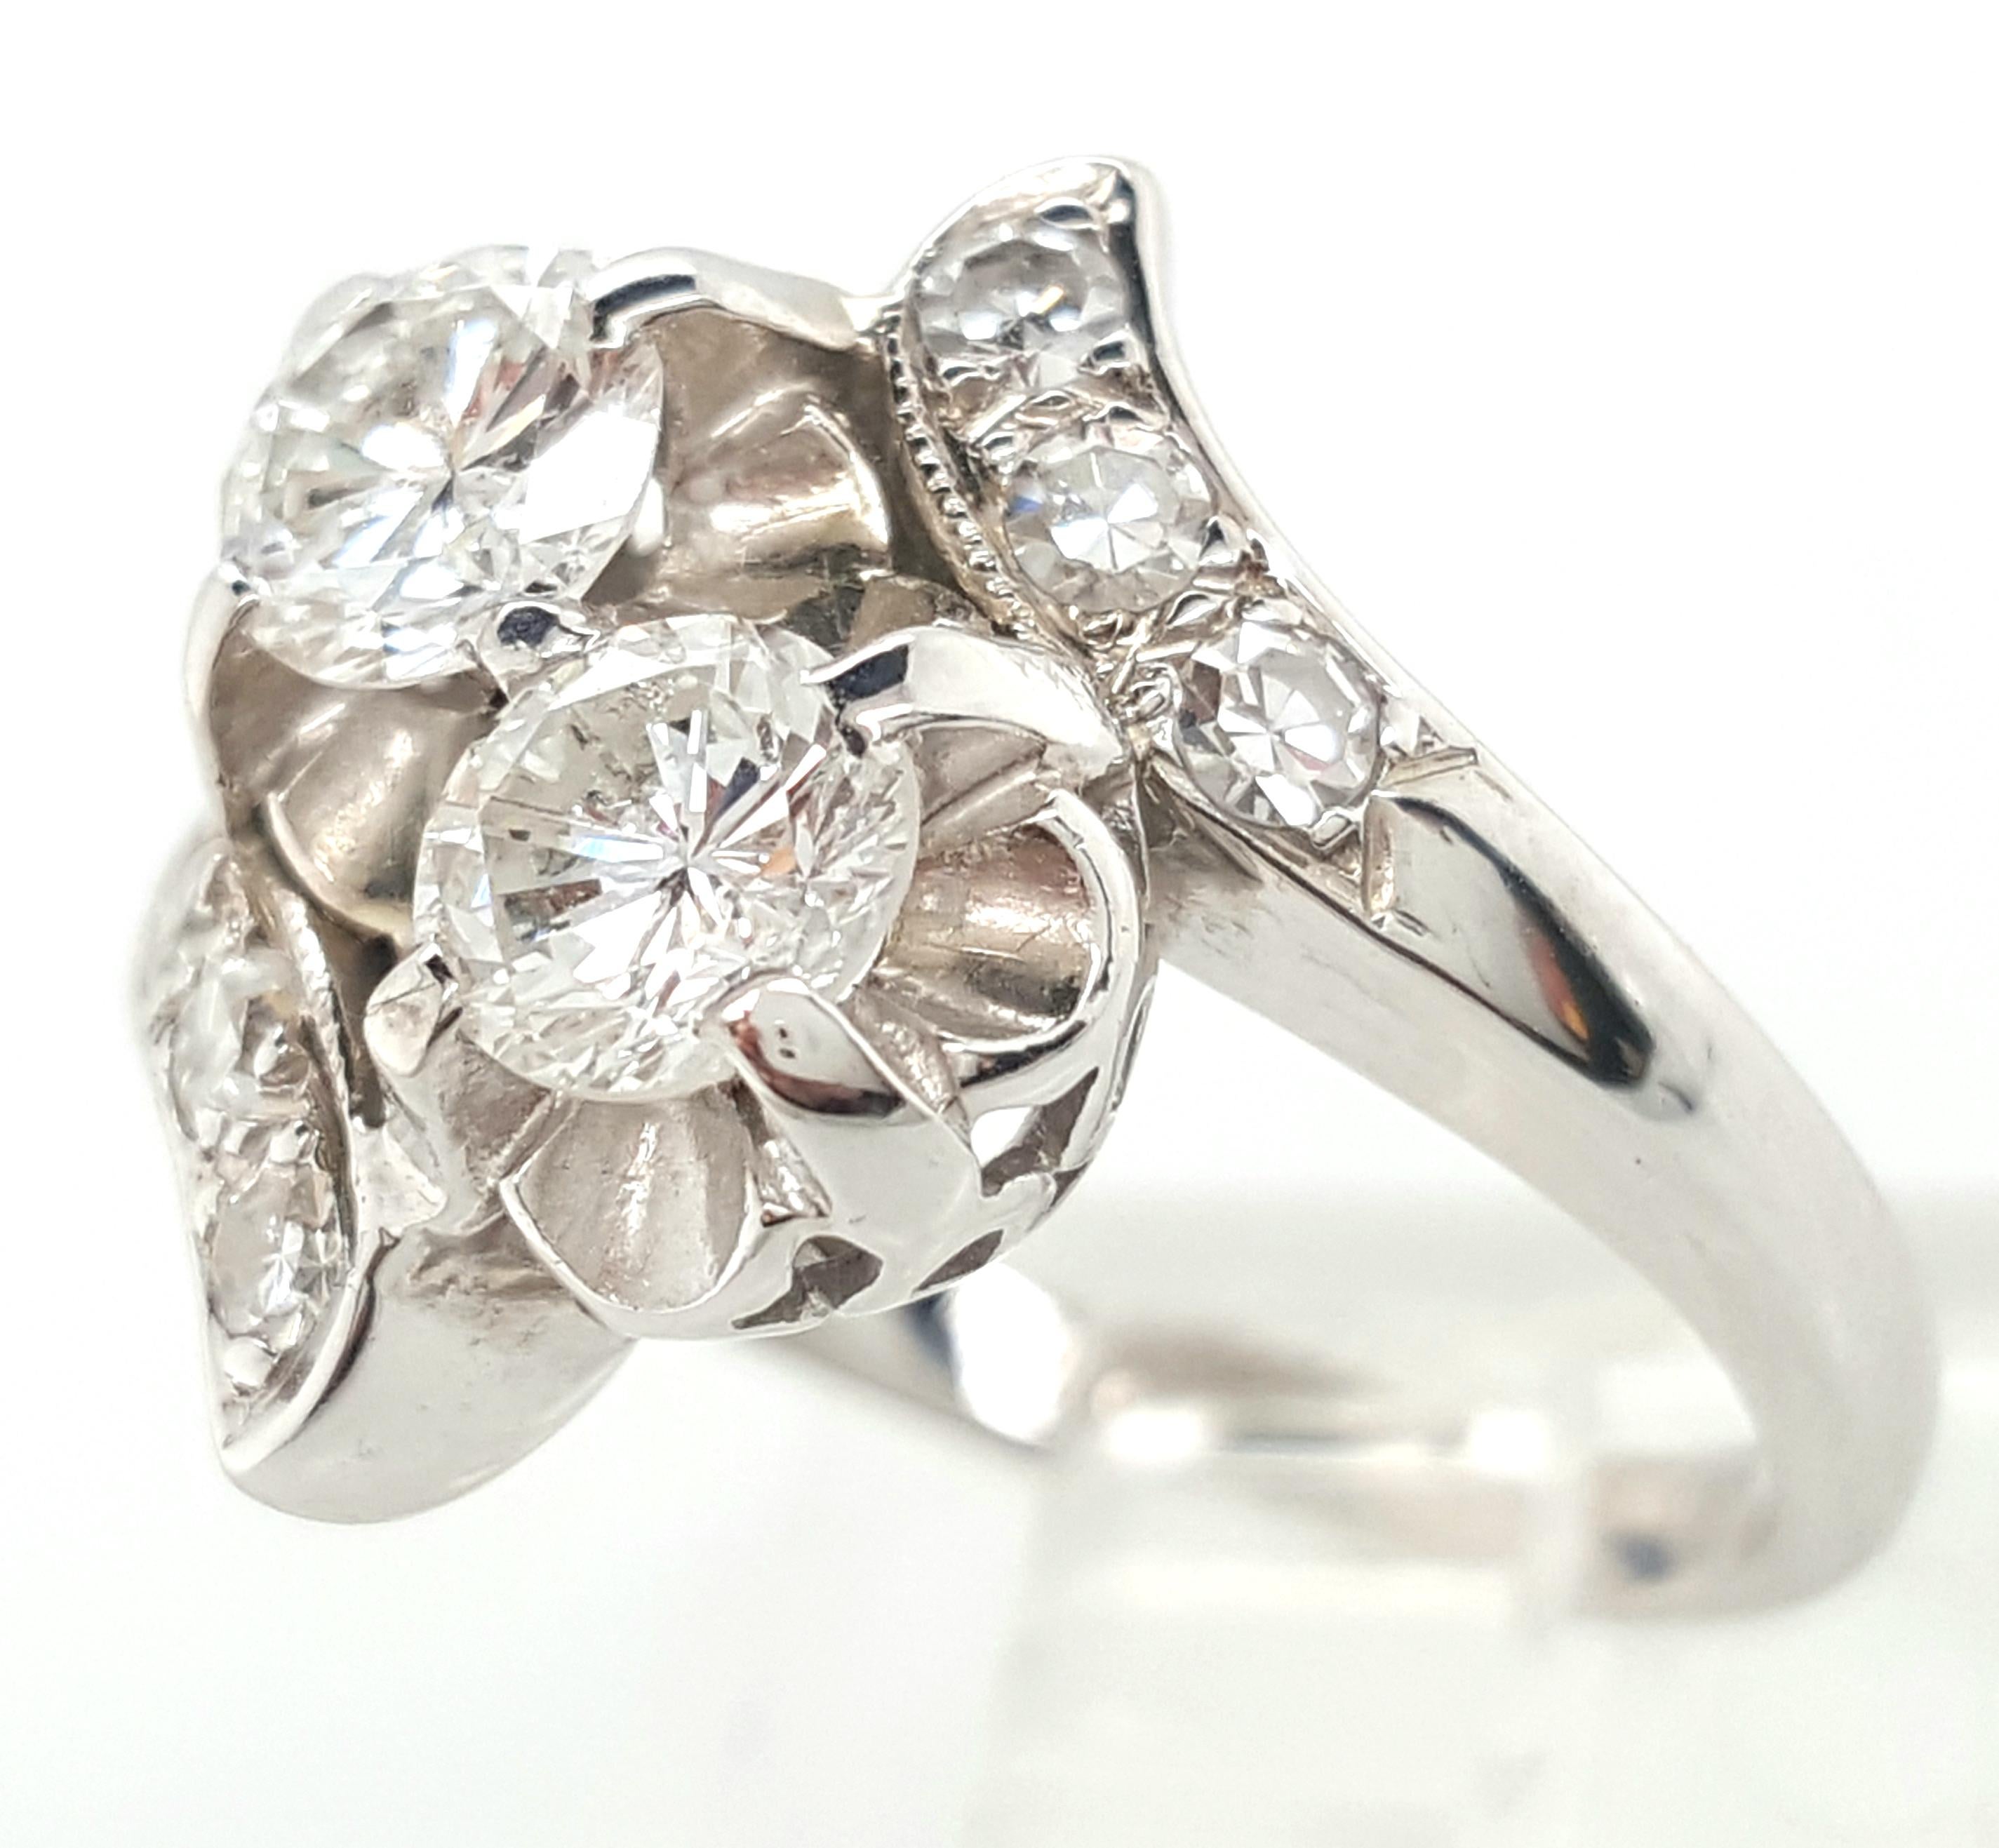 This lovely 14 karat white gold vintage bypass ring features two round brilliant cut diamonds diagonally set in a shared prong tulip setting accented by a gallery of open work in the shape of teardrops.   The diamonds weigh approximately 0.80 carats